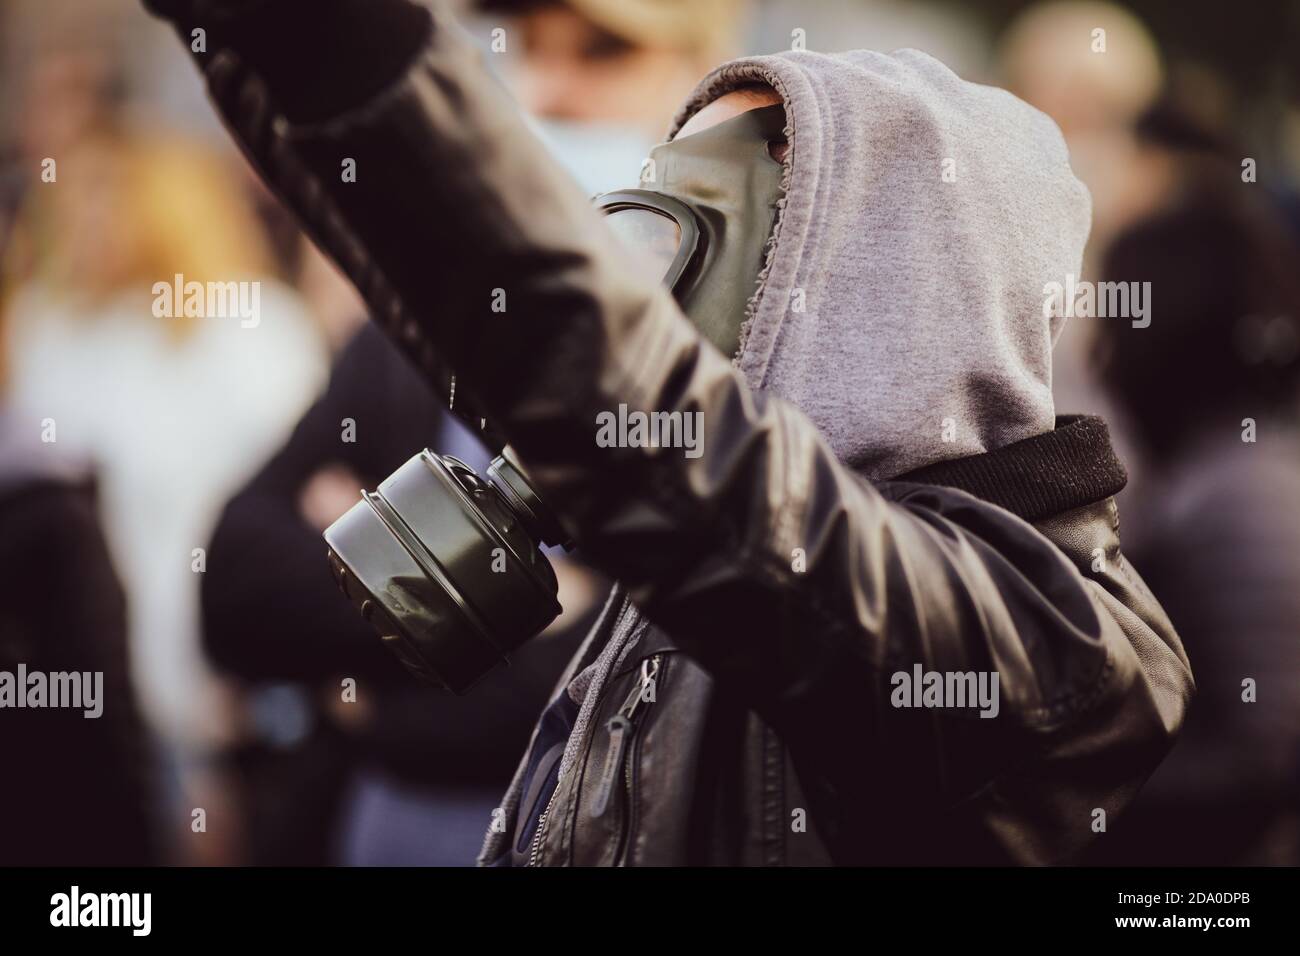 Shallow depth of field (selective focus) image with a protestor wearing a hoodie and a military gas mask. Stock Photo